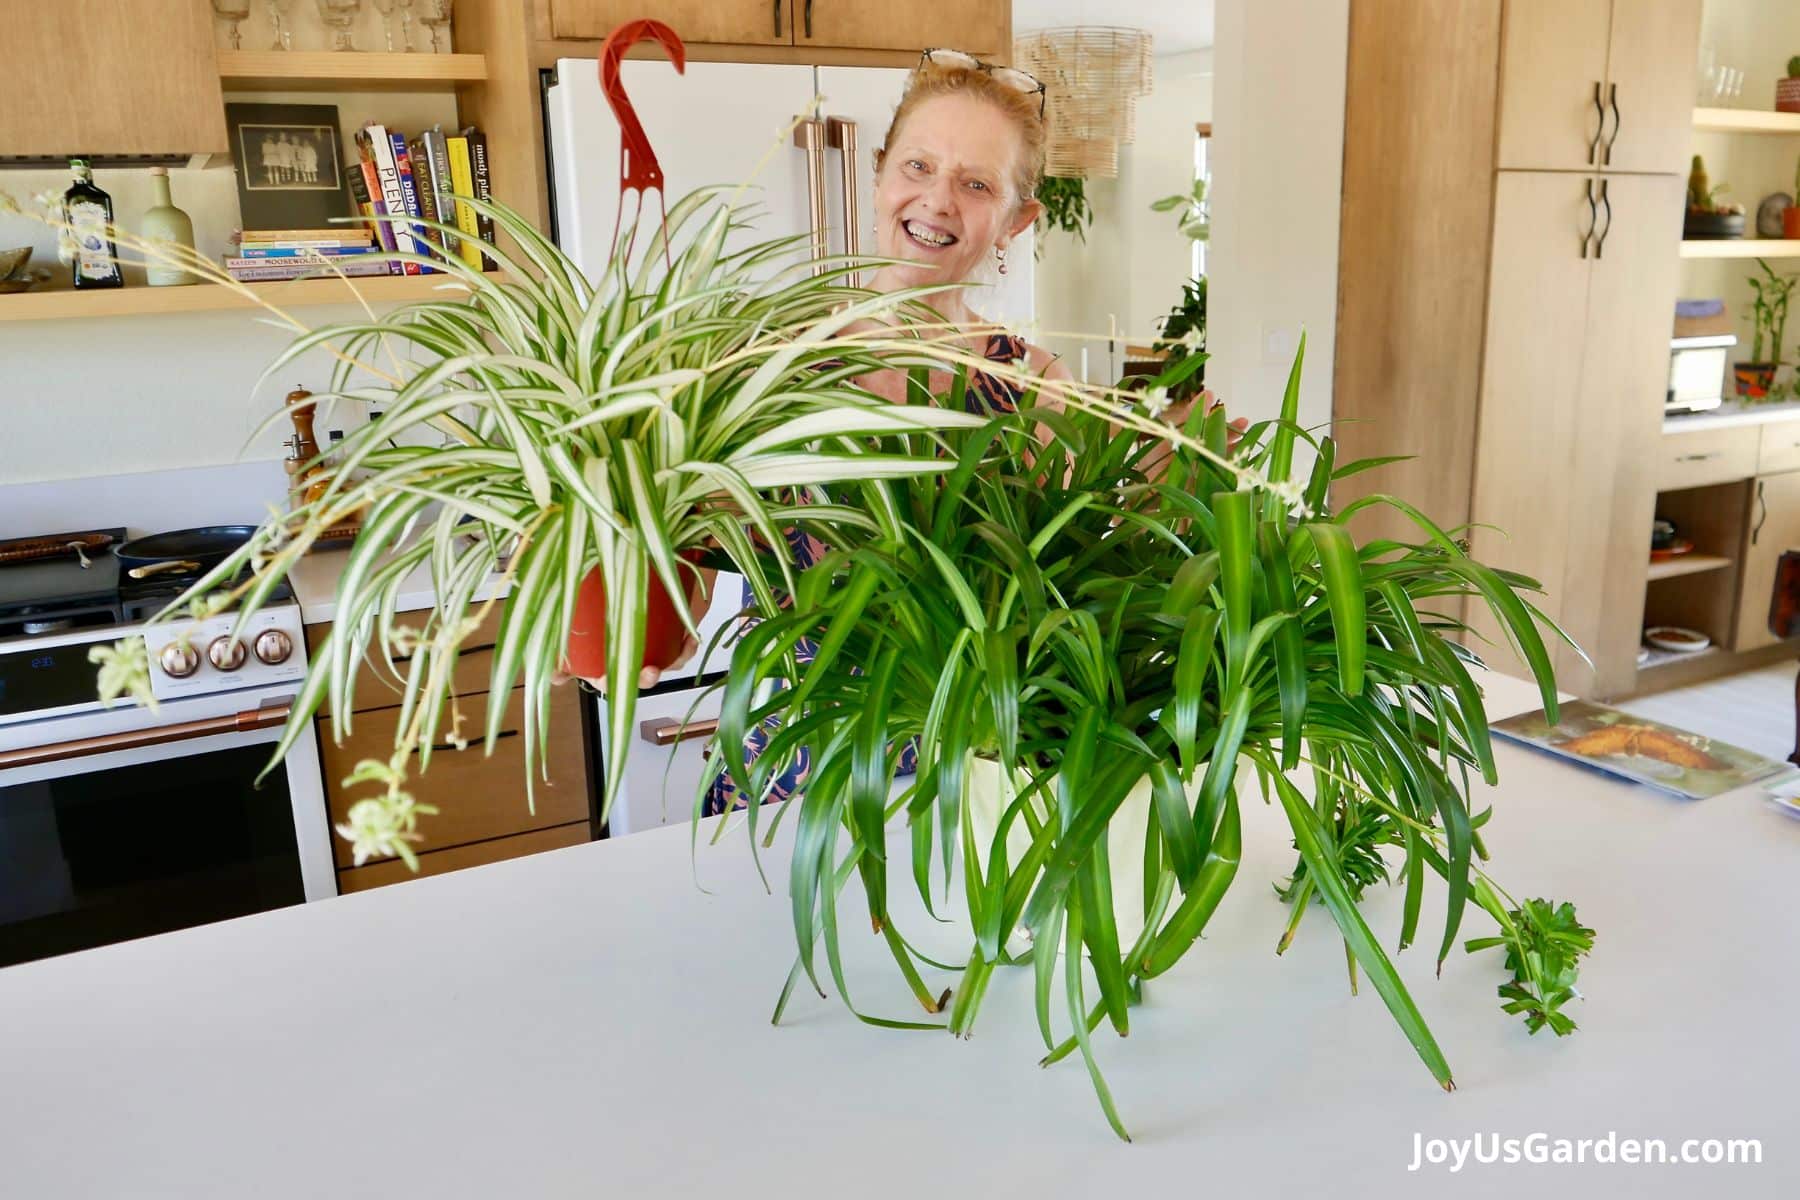 Nell Foster stands in her kitchen holding two spider plants one is variegated and the other is green both plants are producing babies. 